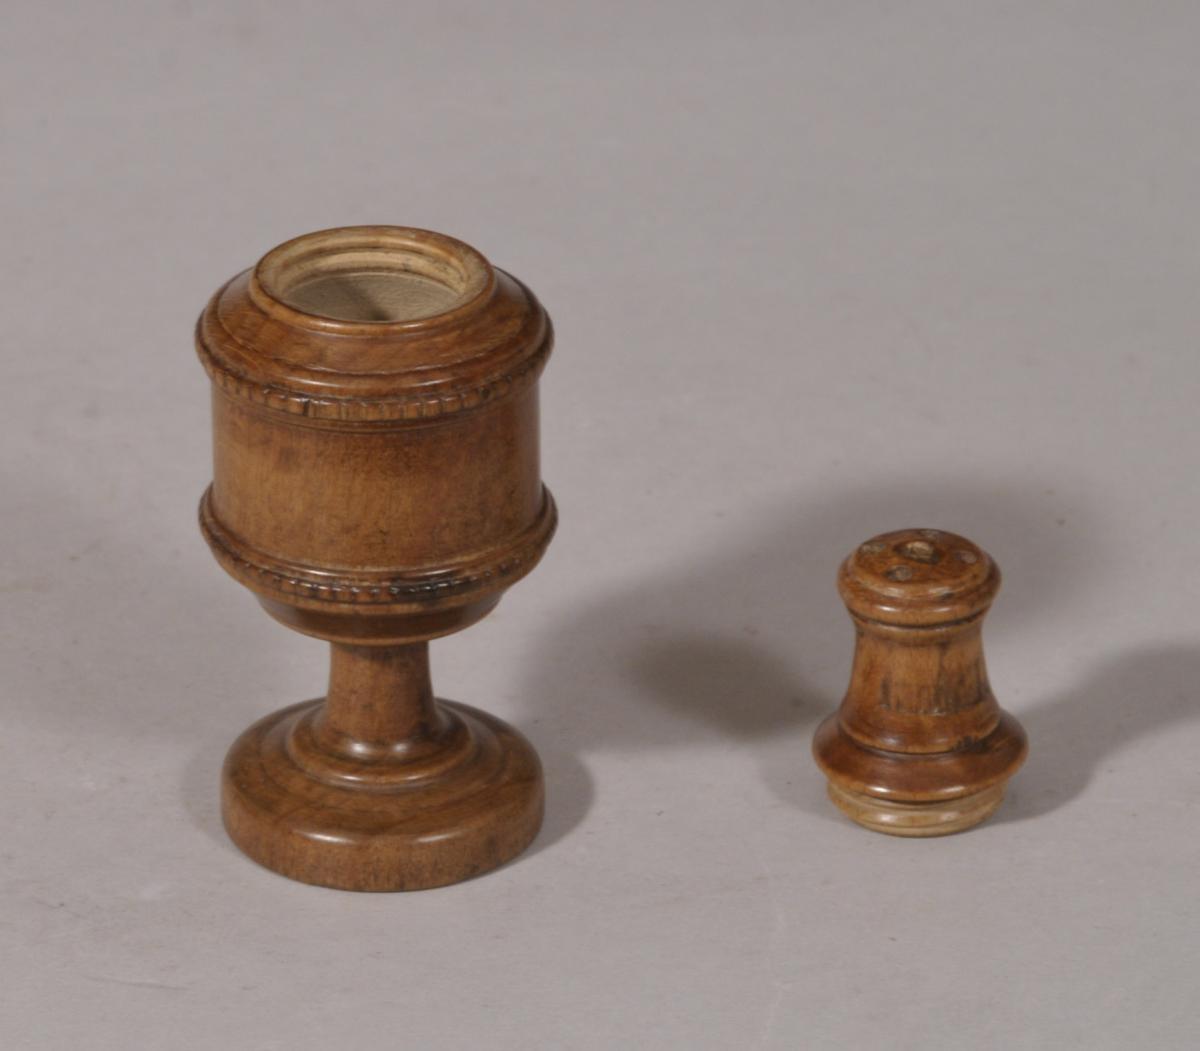 S/5782 Antique Treen 19th Century Sycamore Pepperette or Spice Shaker